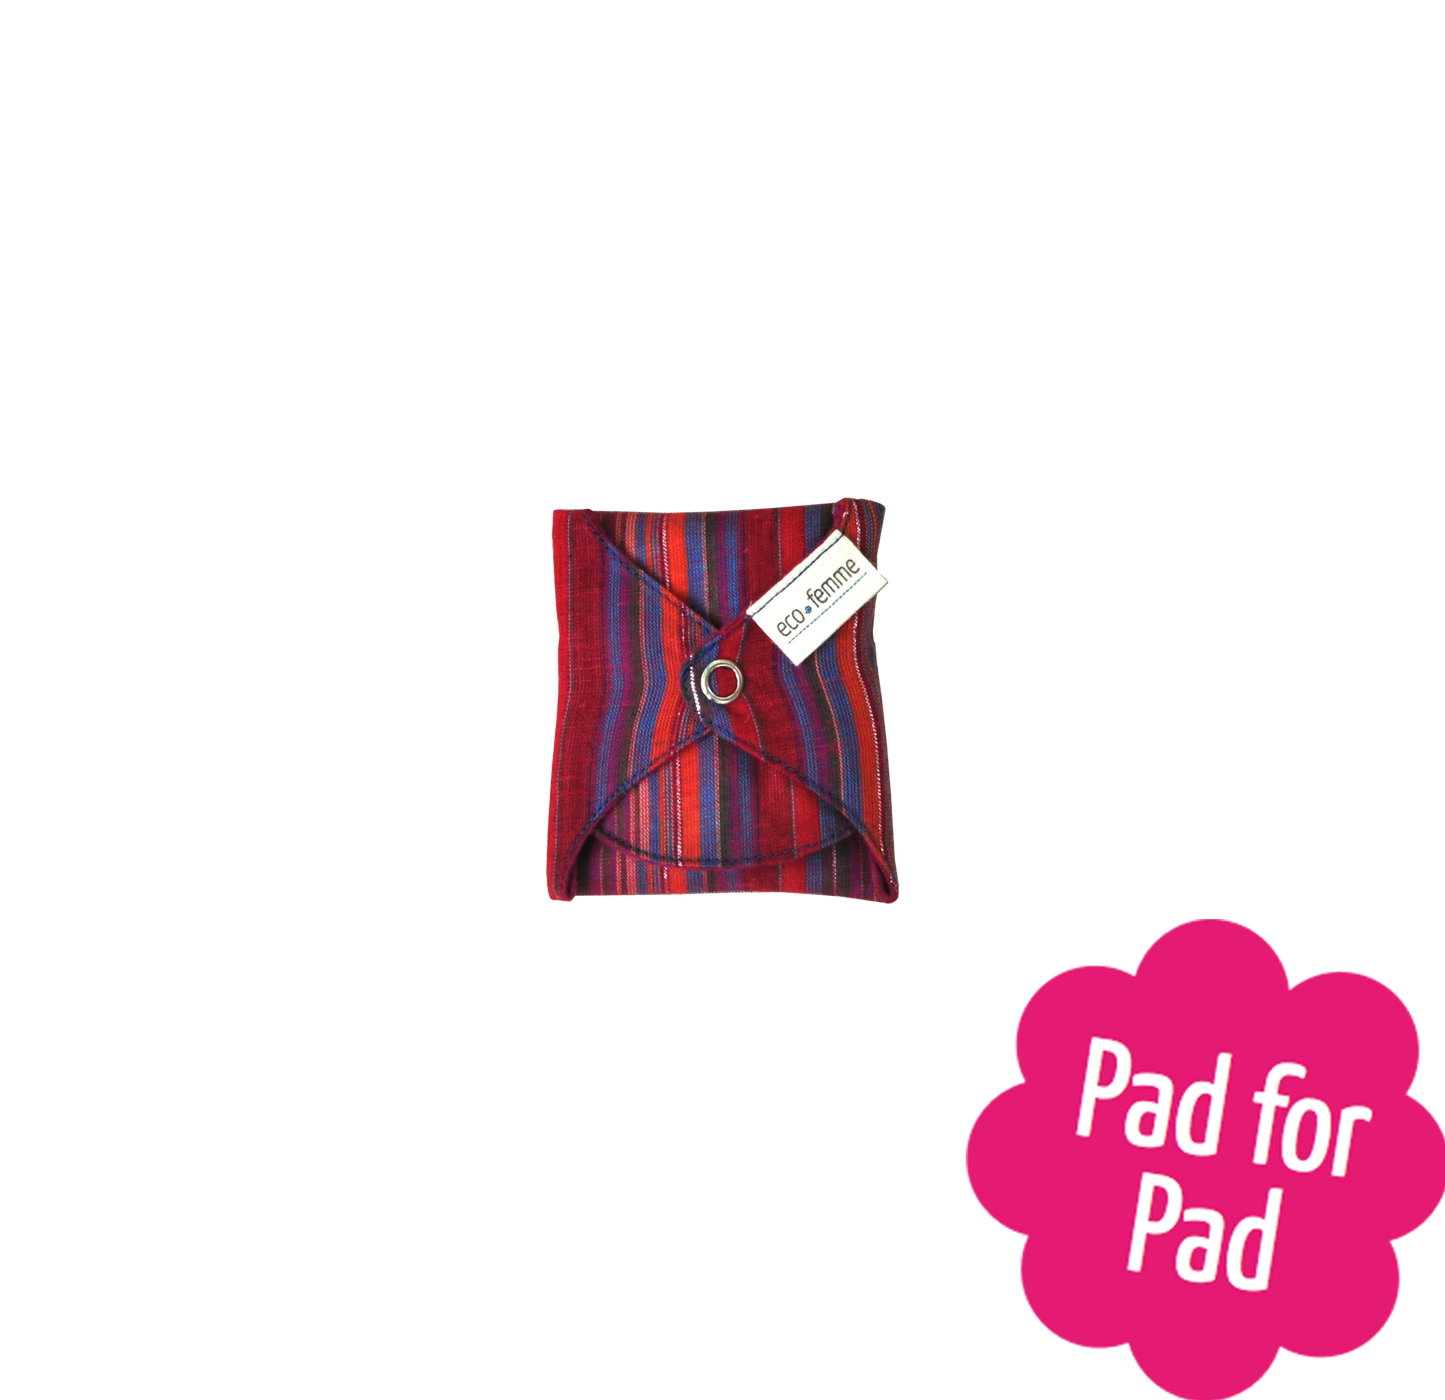 Reusable and eco-friendly menstrual pad, providing comfort and sustainable period care